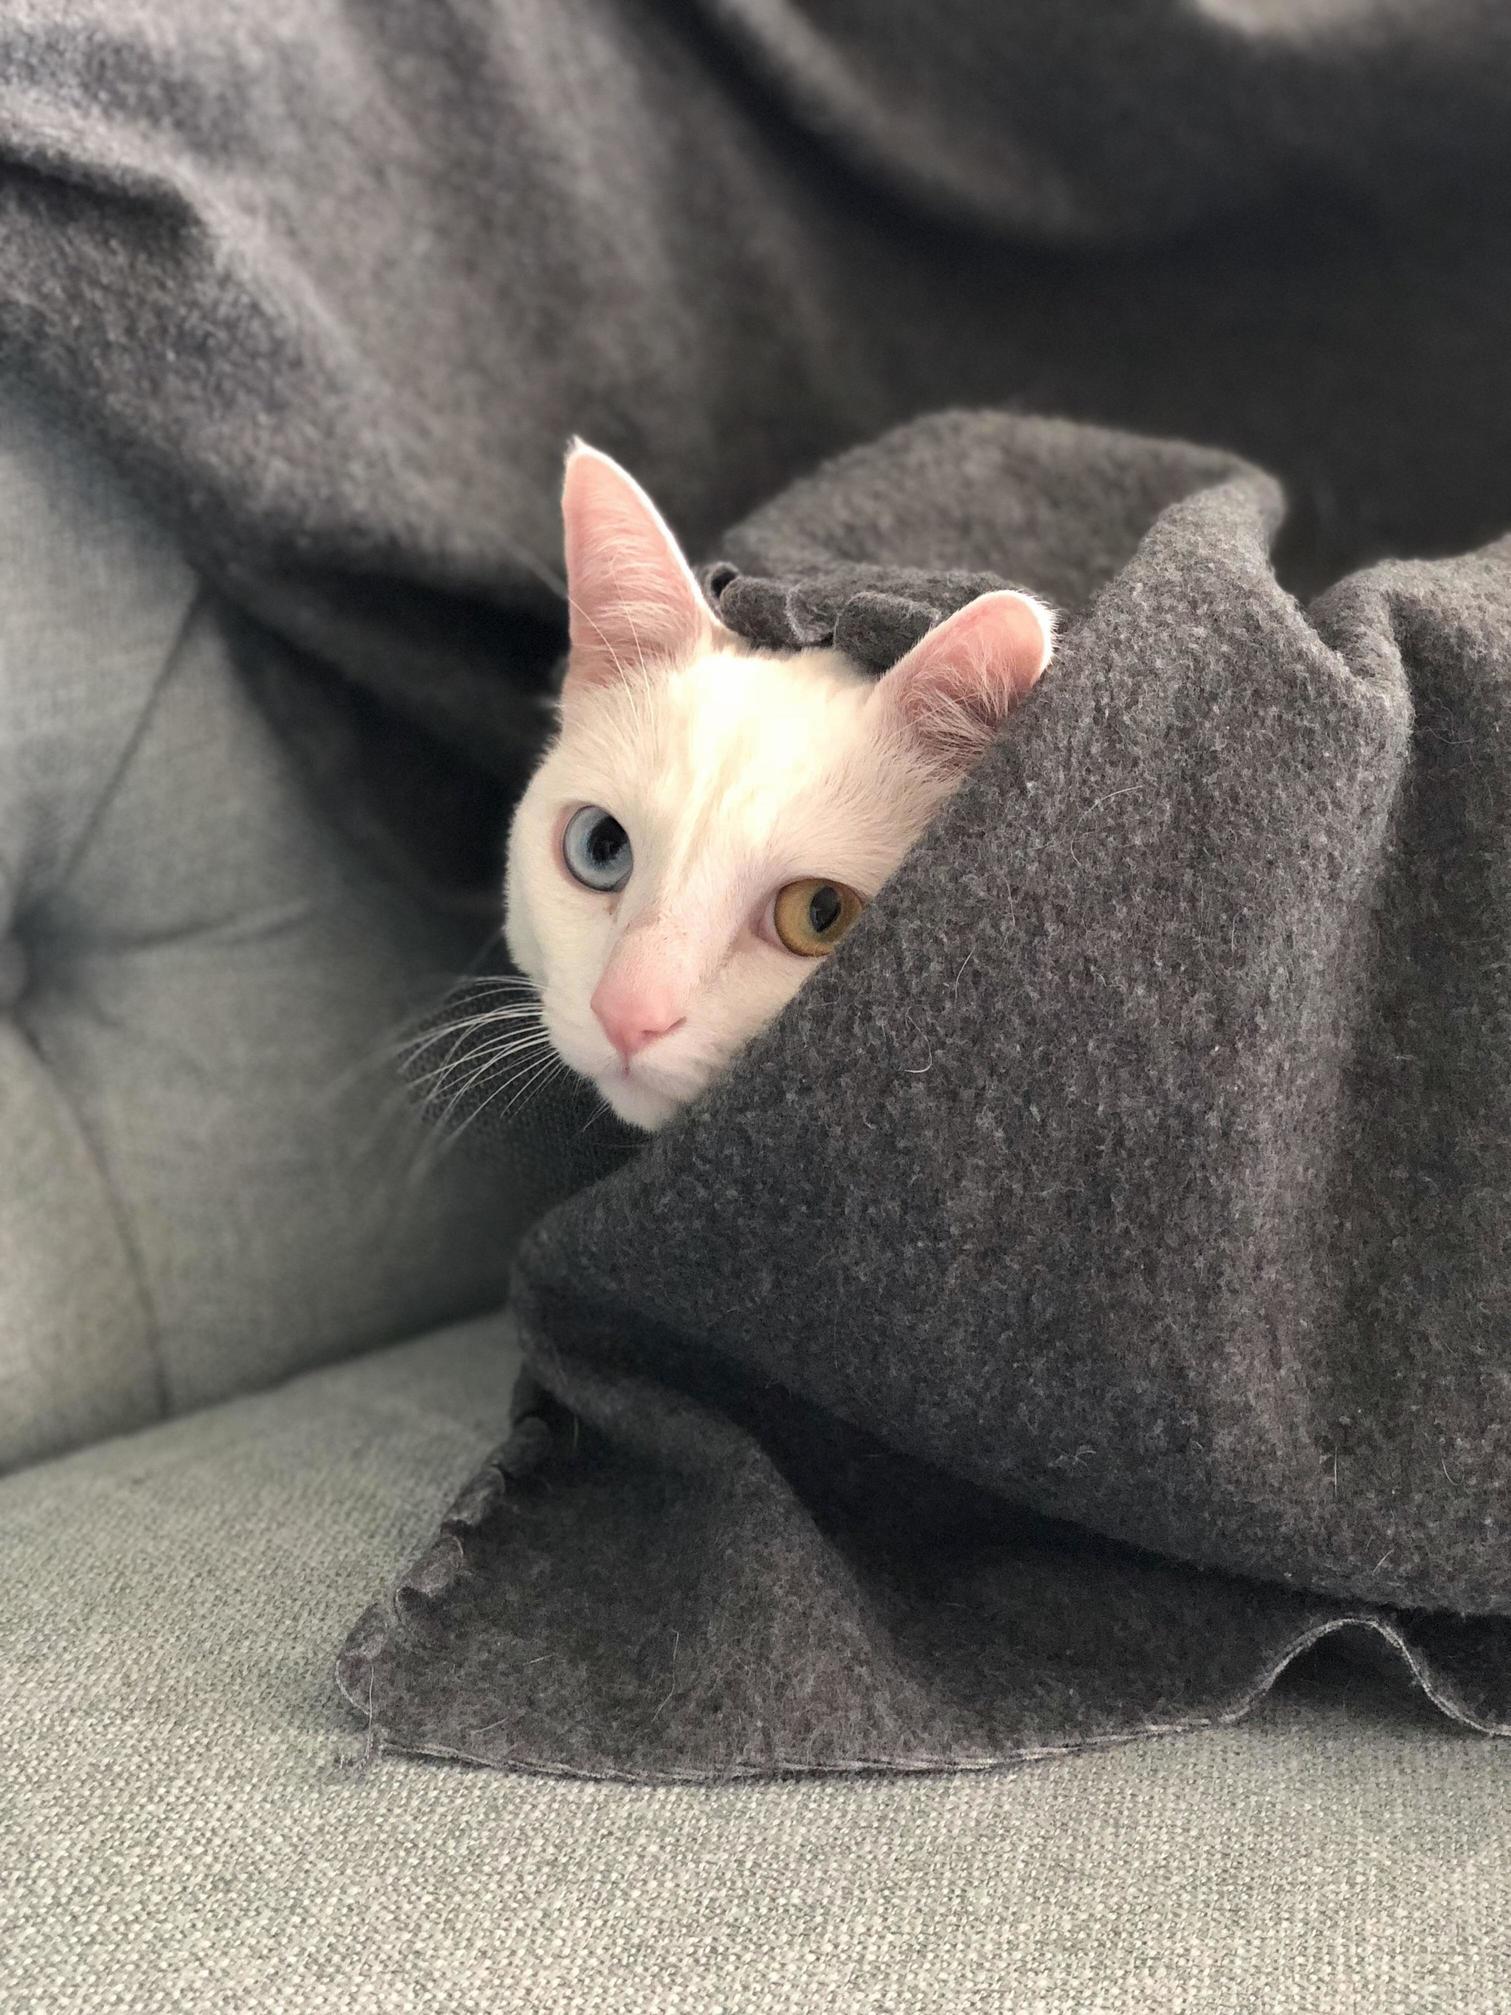 Taco emerging from his nap cave